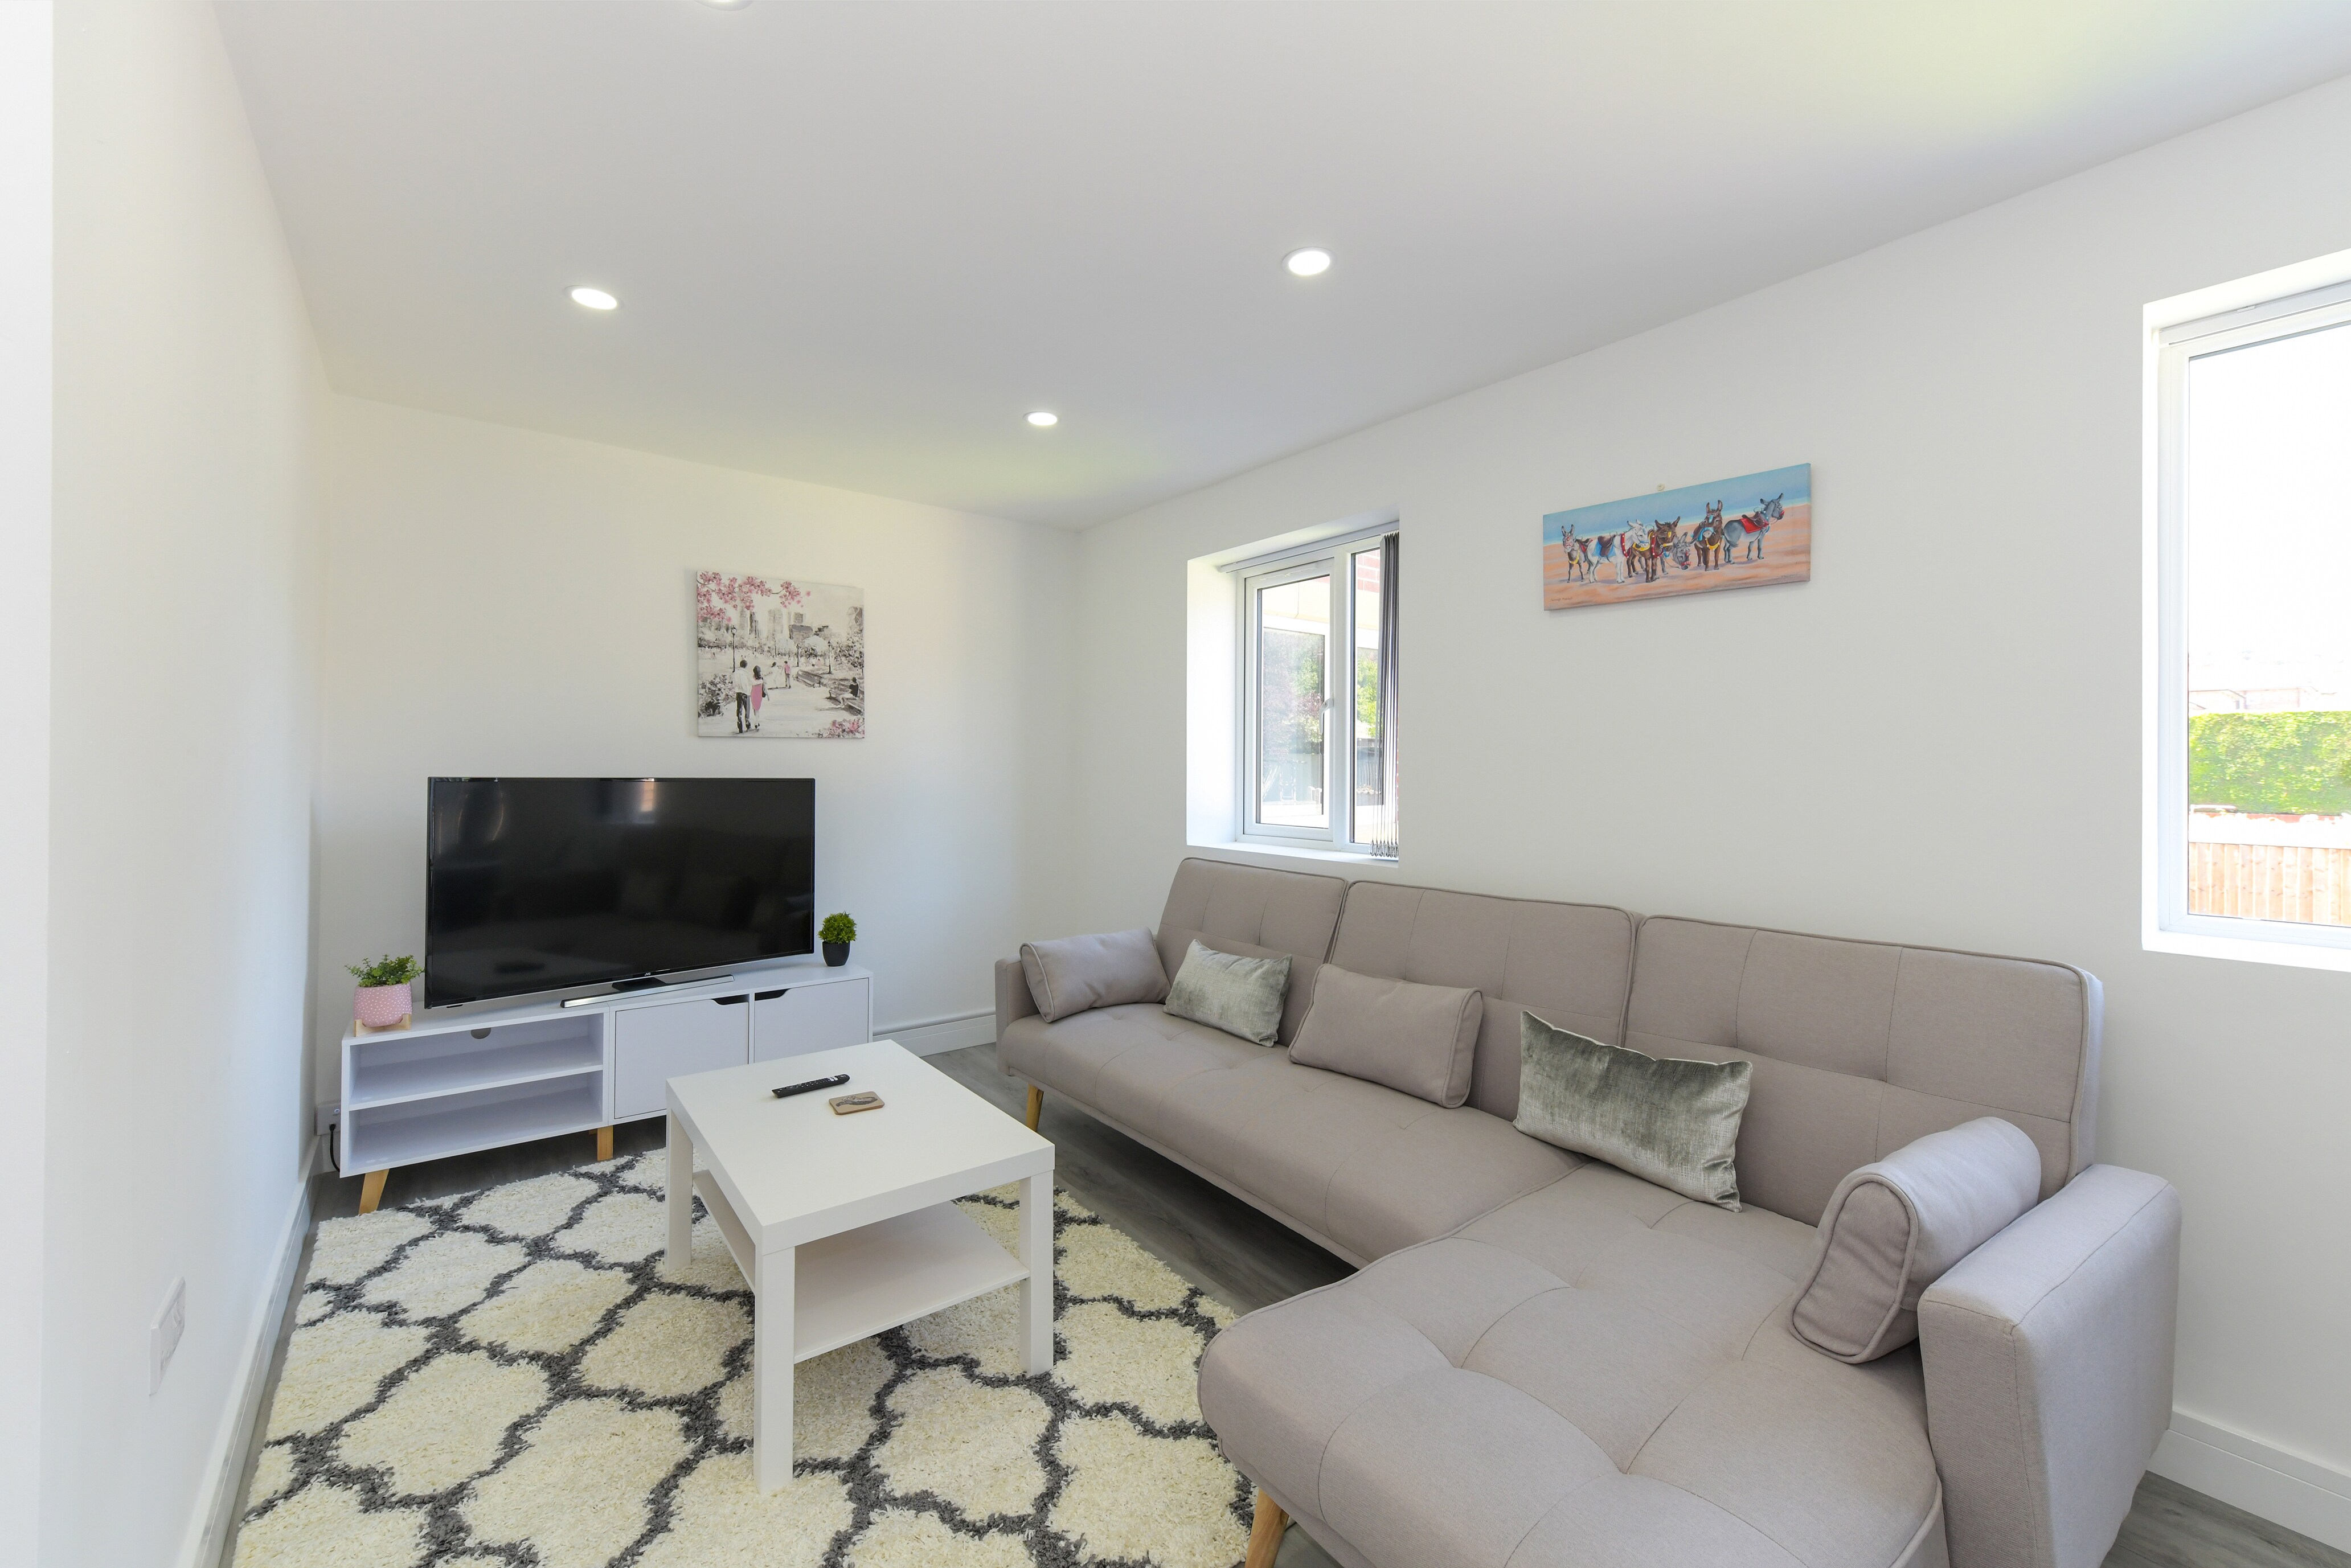 Property Image 1 - Contemporary 2bed Hideaway, Low Carbon, Parking